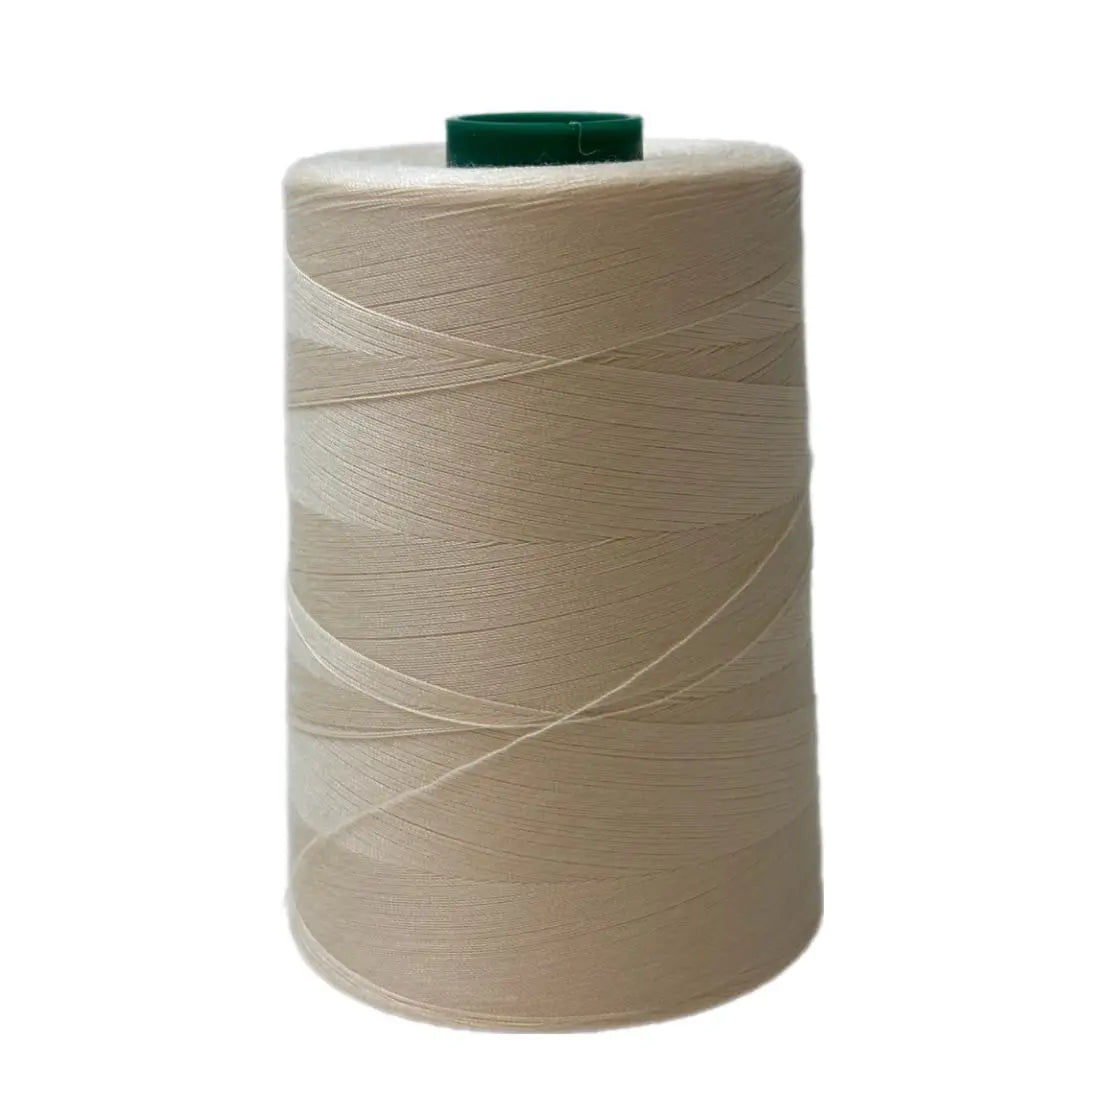 W32186 Dyed Natural Perma Core Tex 40 Polyester Thread American & Efird Permacore